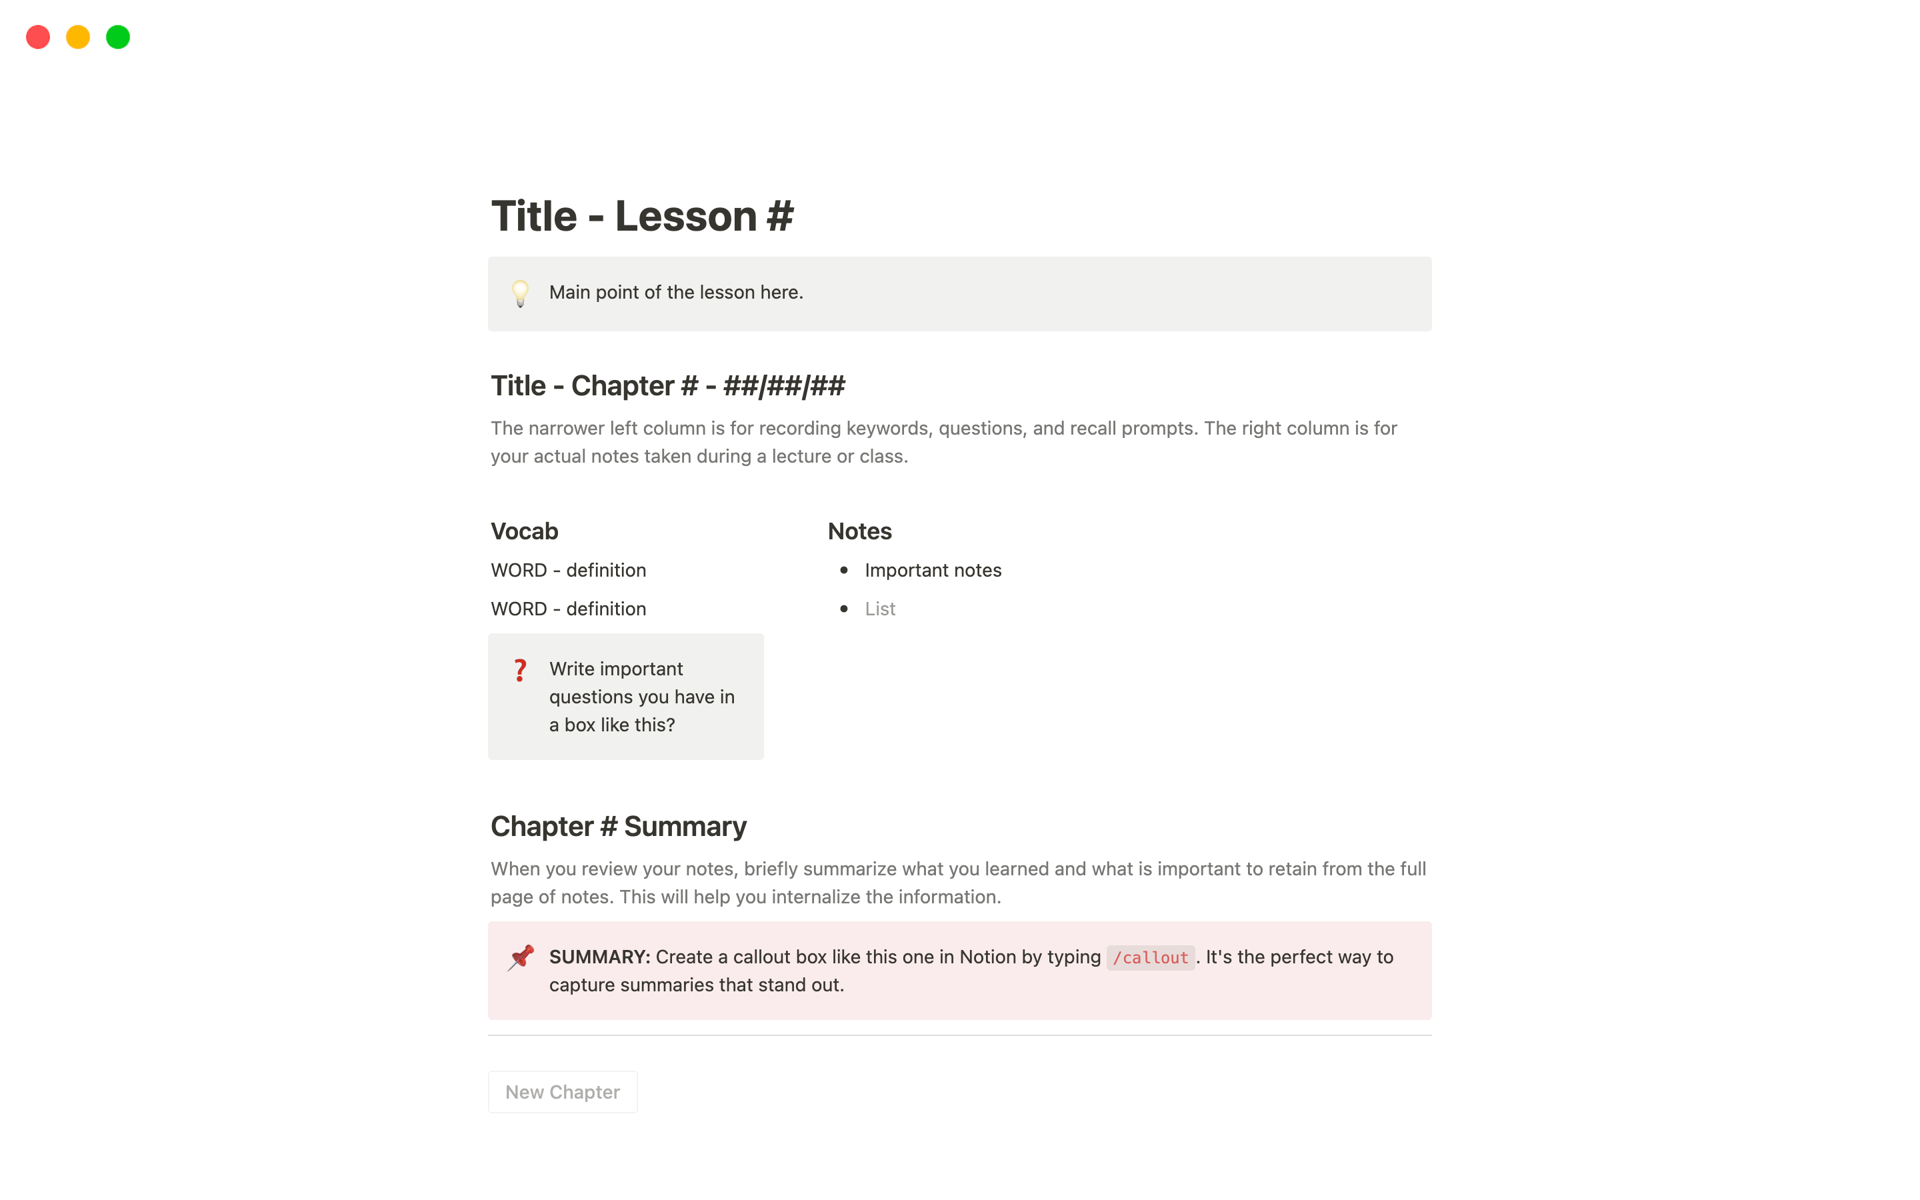 This template is a structured and organized tool for effective note-taking during lectures or classes.